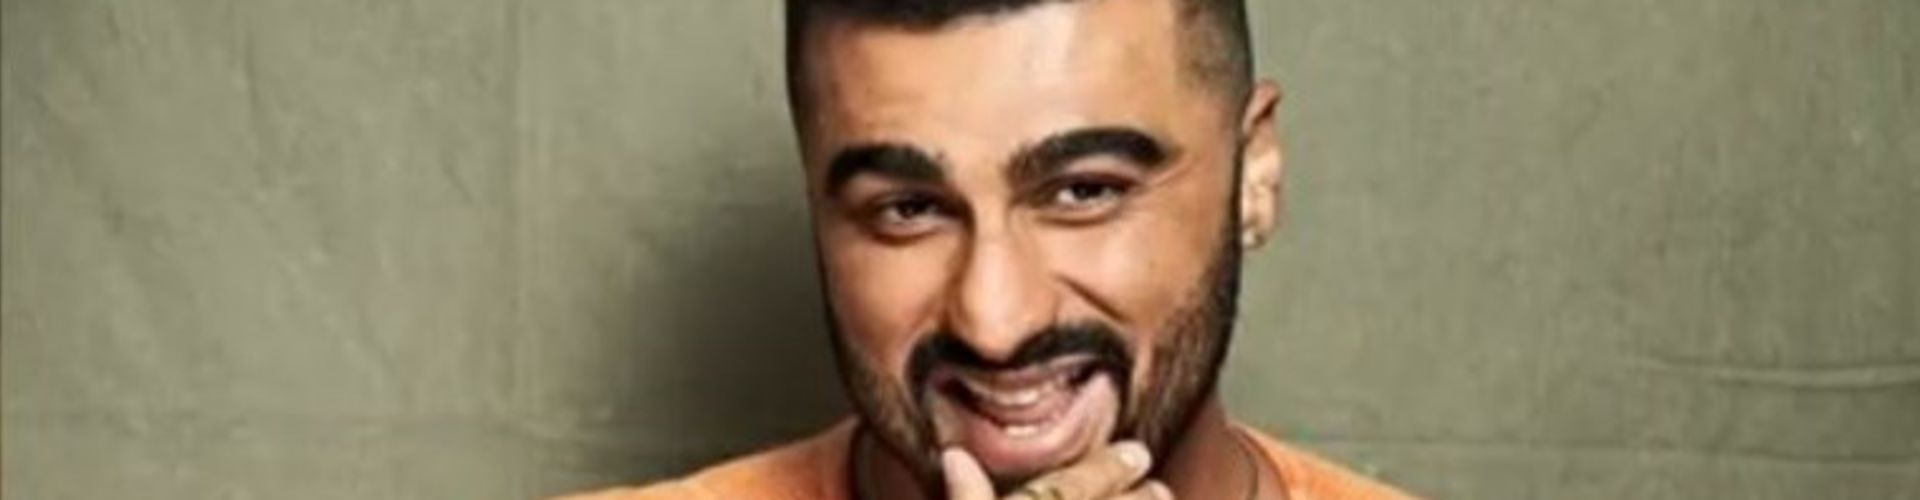 Arjun Kapoor takes off the cap and reveals his collection